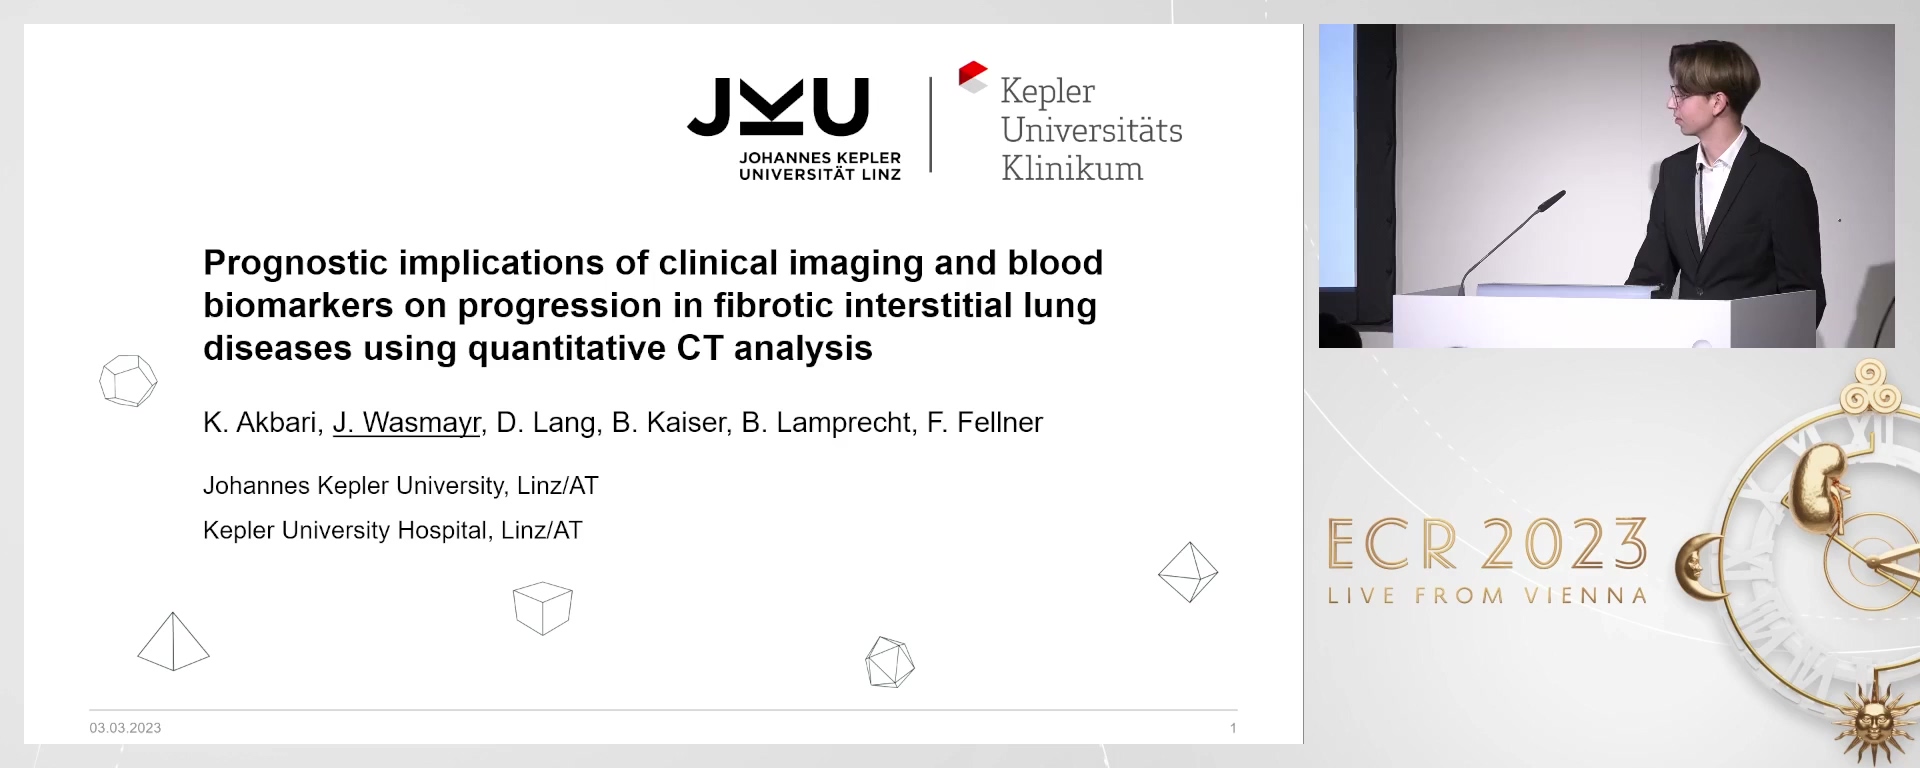 Prognostic implications of clinical imaging and blood biomarkers on progression in fibrotic interstitial lung diseases using quantitative CT analysis - Johannes  Wasmayr, Linz / AT